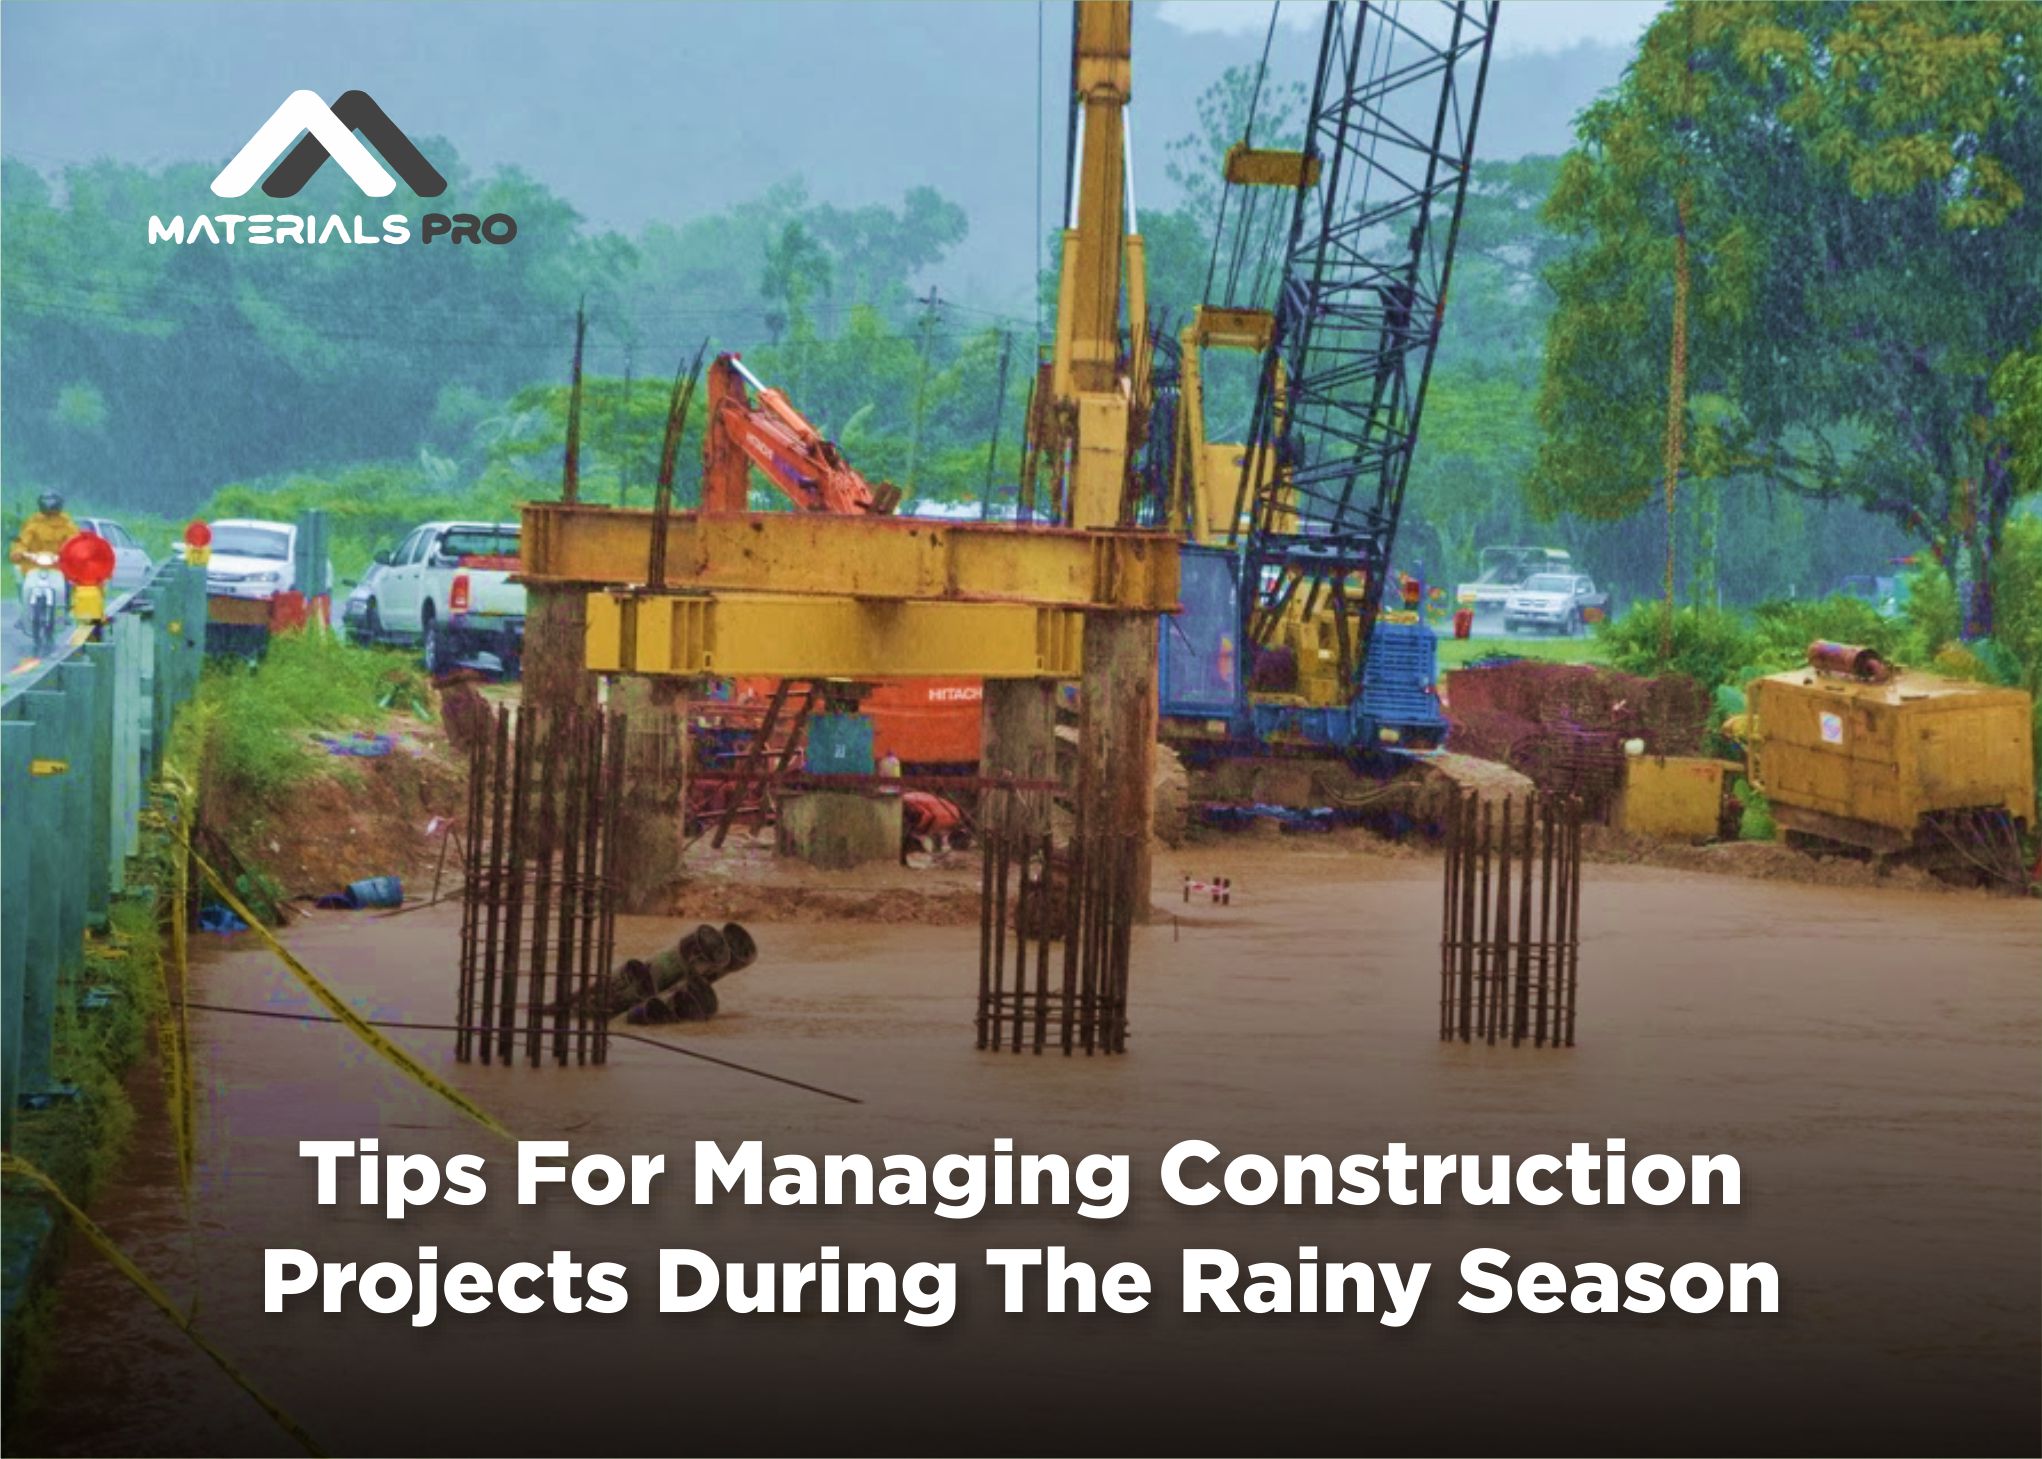 Tips For Managing Construction Projects During The Rainy Season